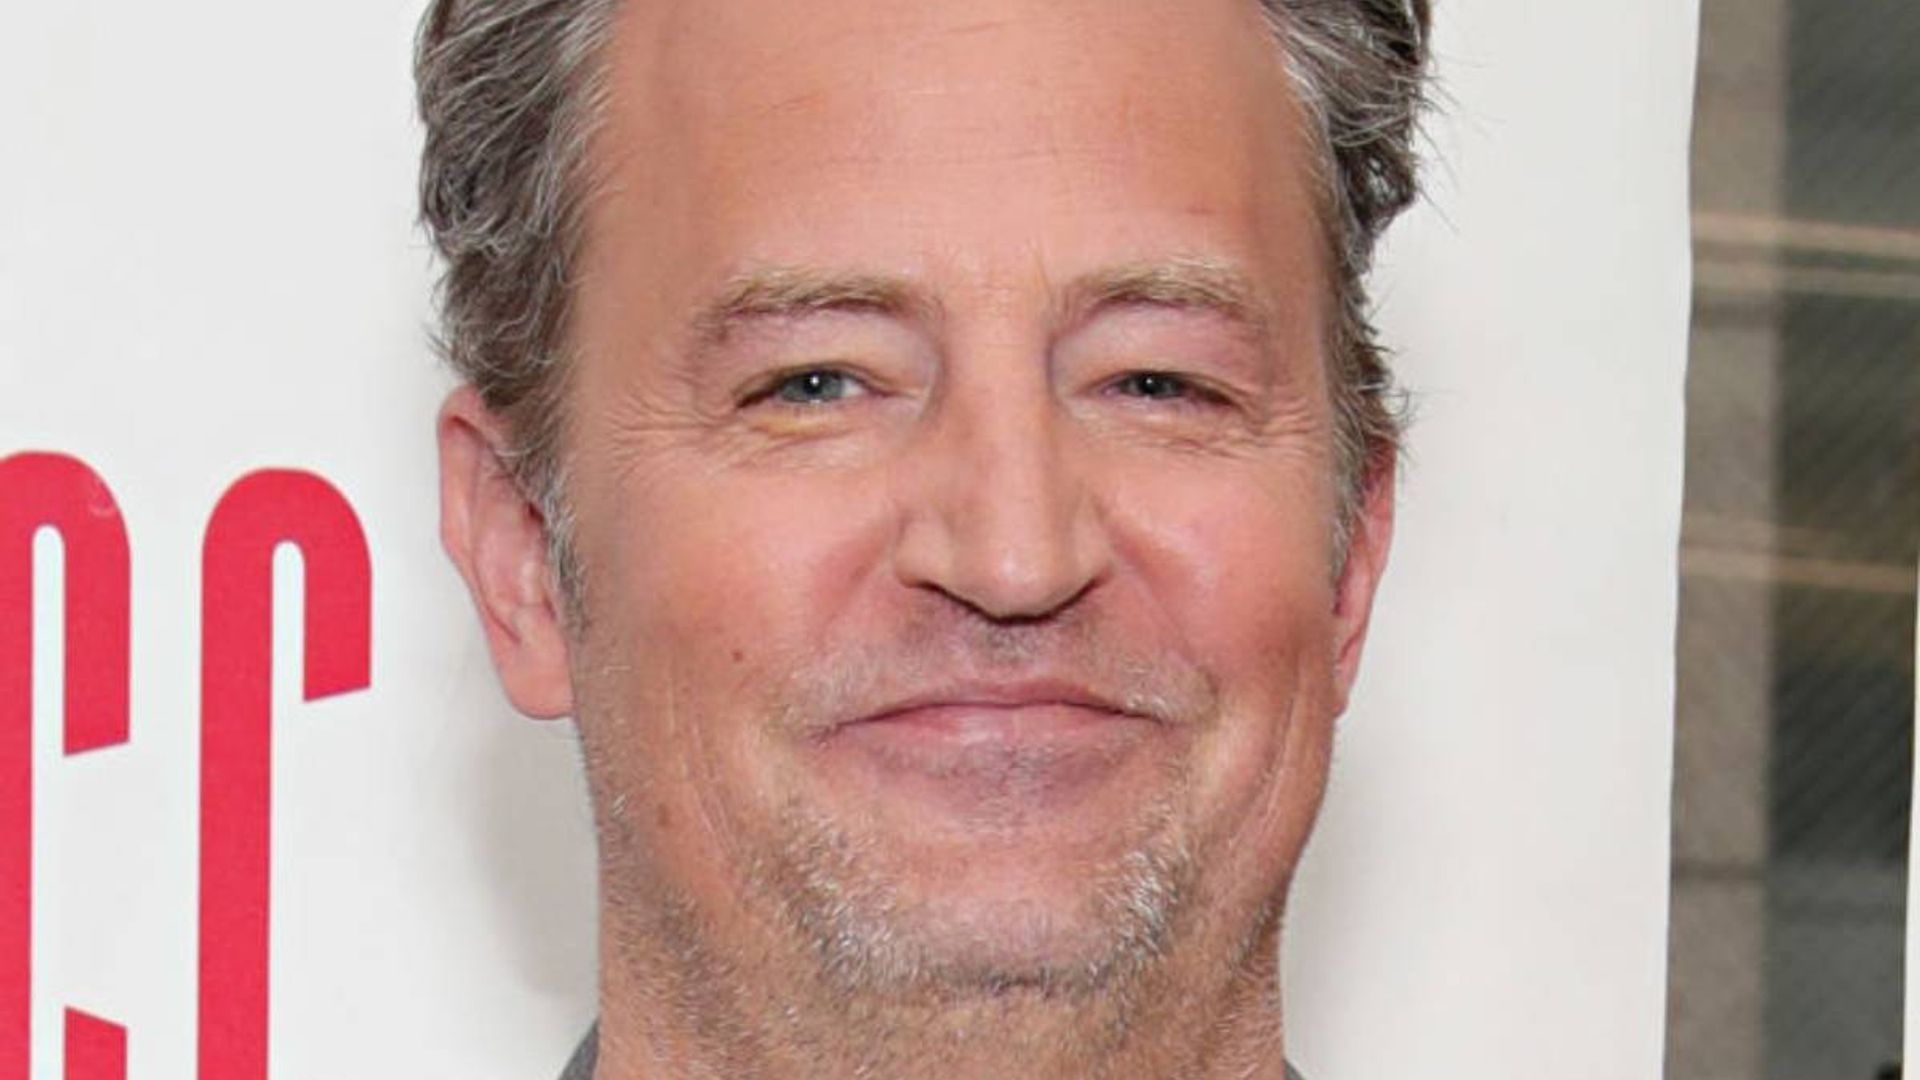 Matthew Perry surprises fans with photo from inside his home - see why!